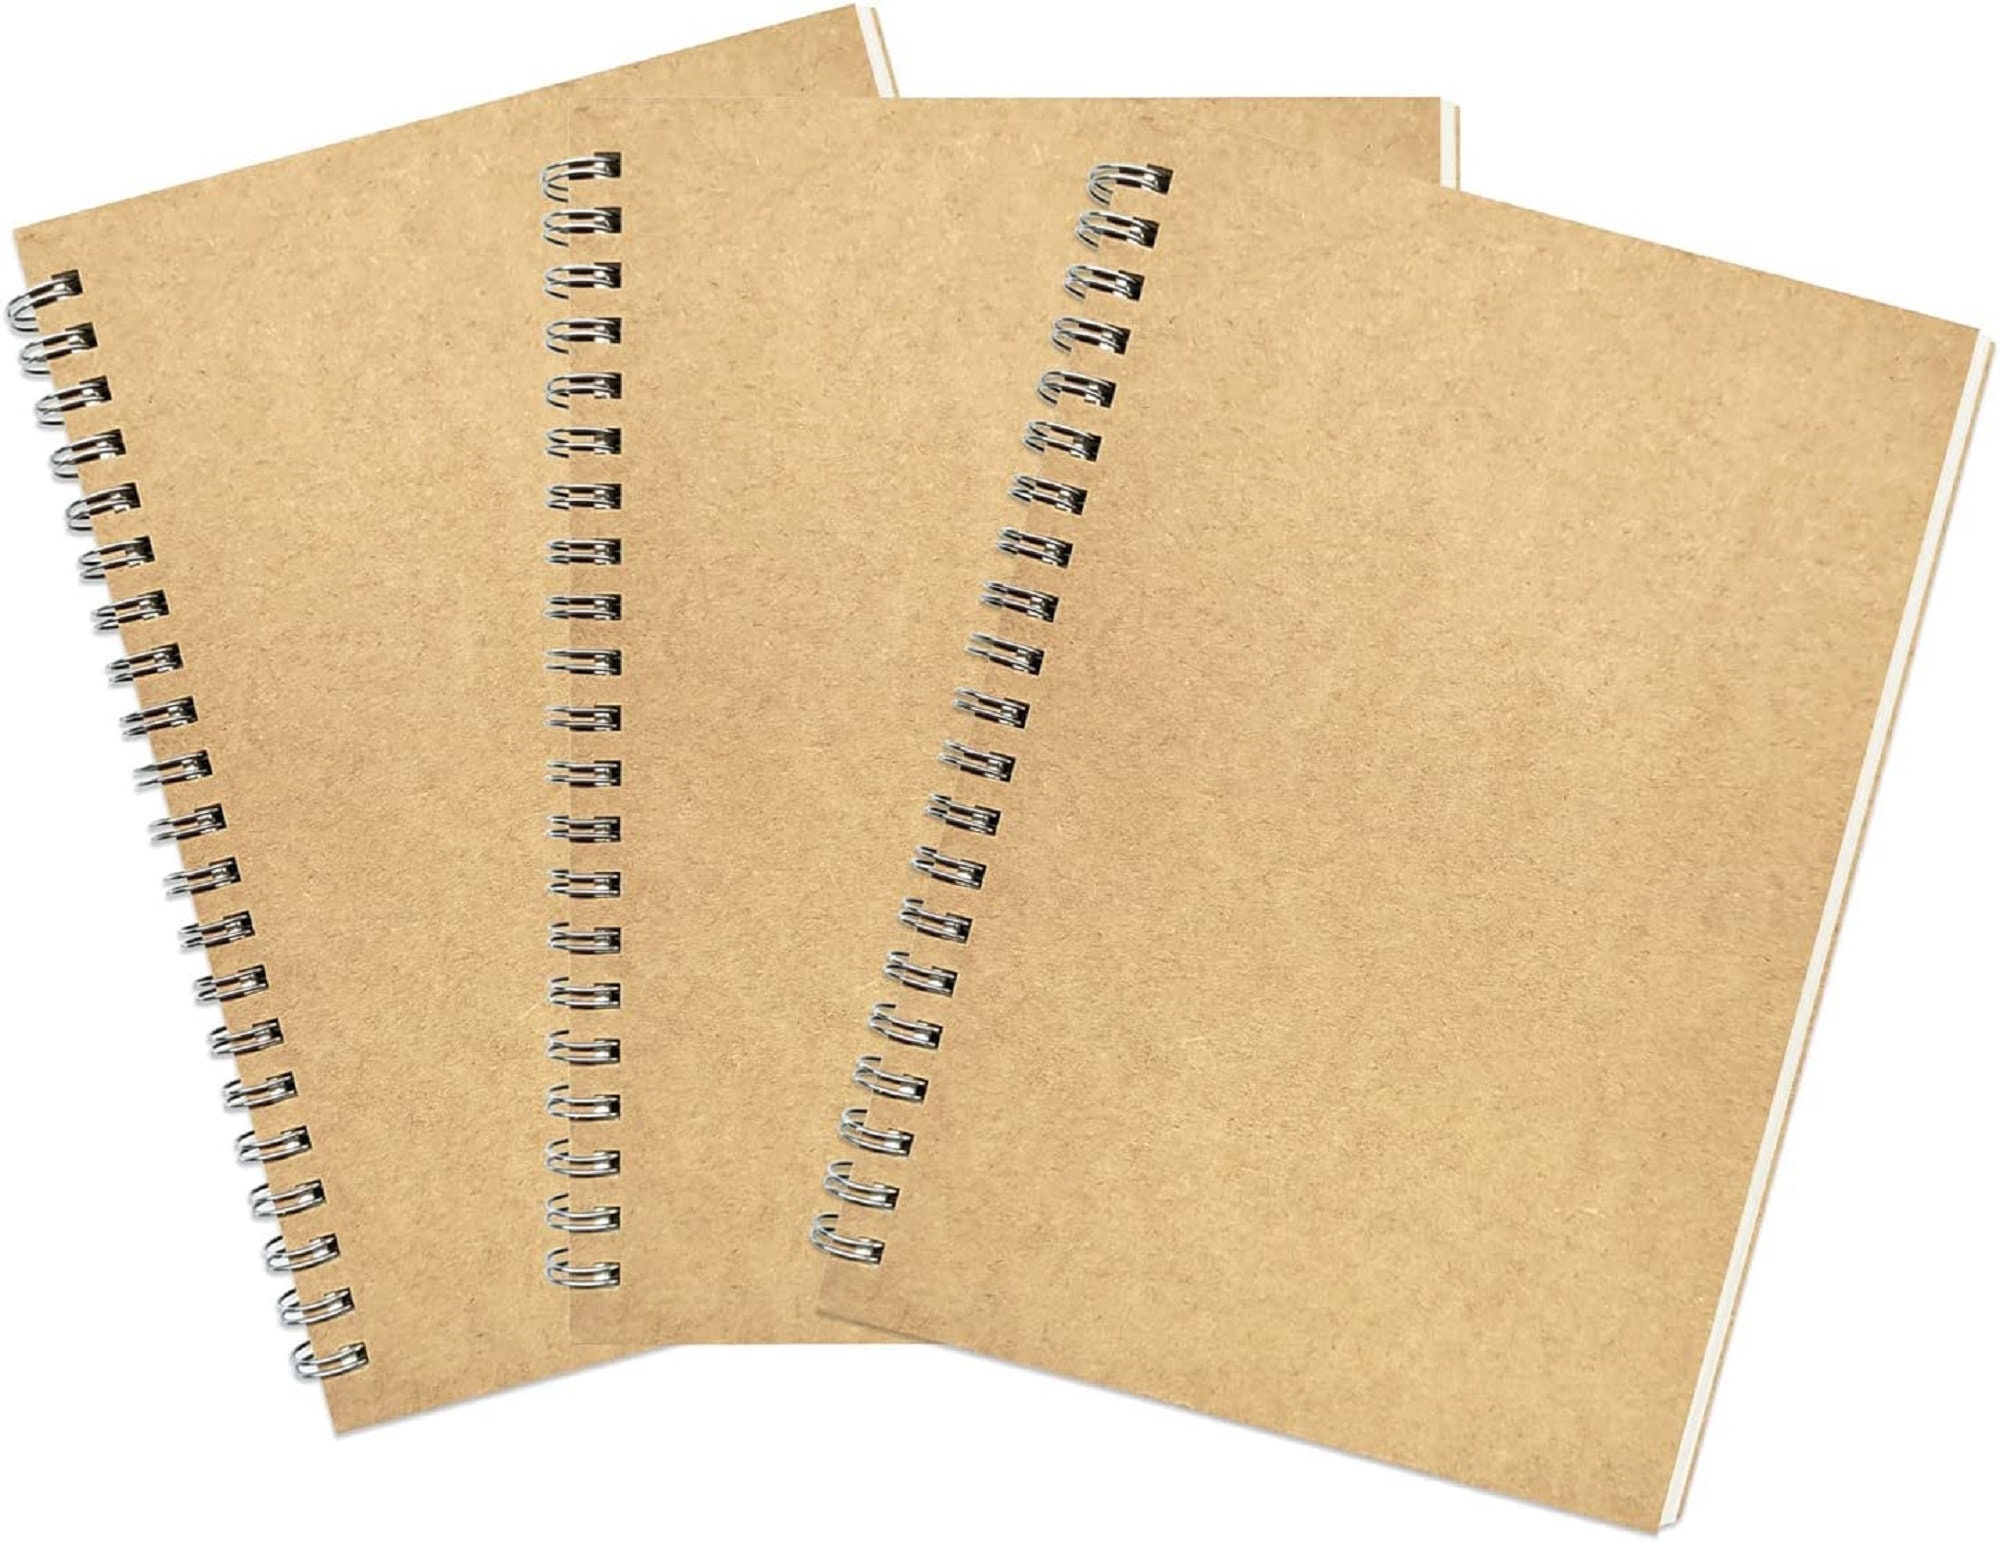  YUREE Spiral Notebook A5/Softcover Spiral Journal, Blank Pages,  50 Sheets (100 Pages), 8.45 x 5.8, Brown, 20 Pack : Office Products